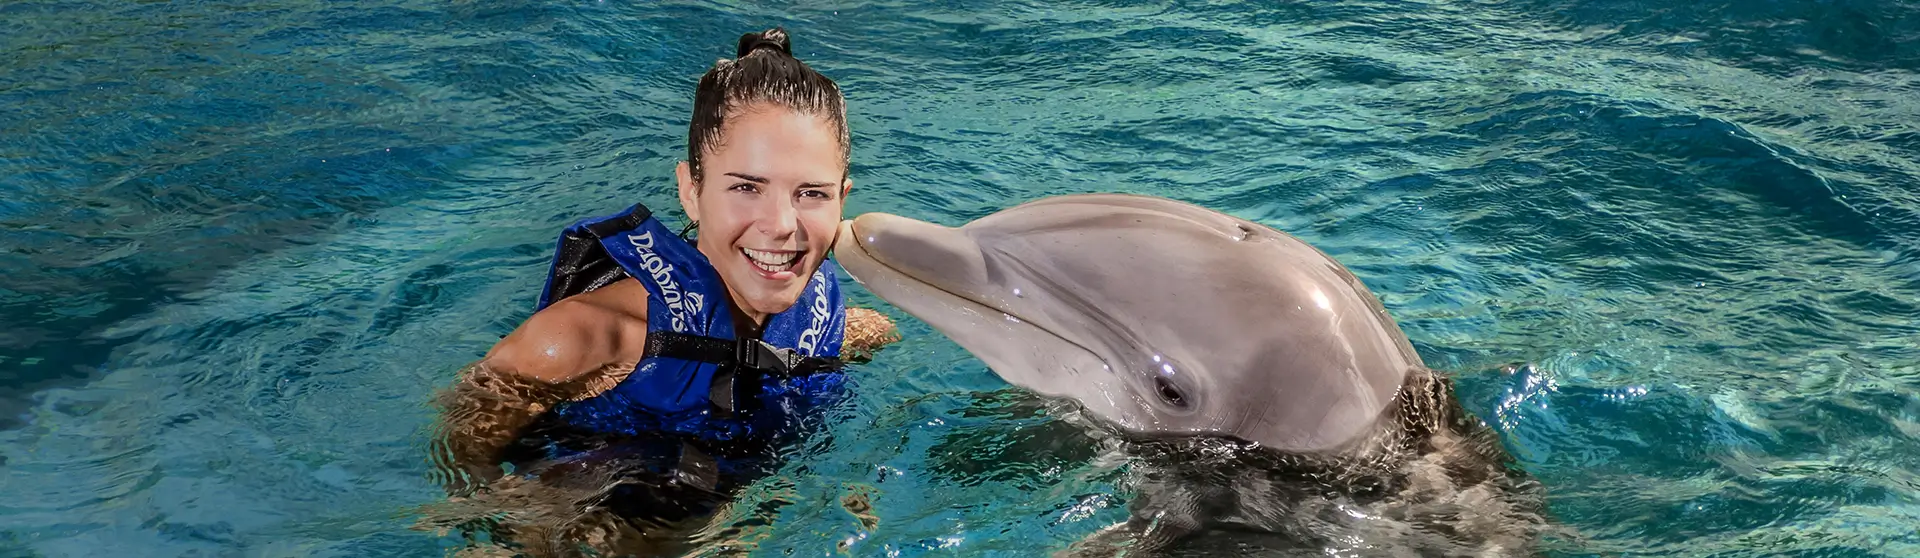 Swimming with Dolphins in Cancun